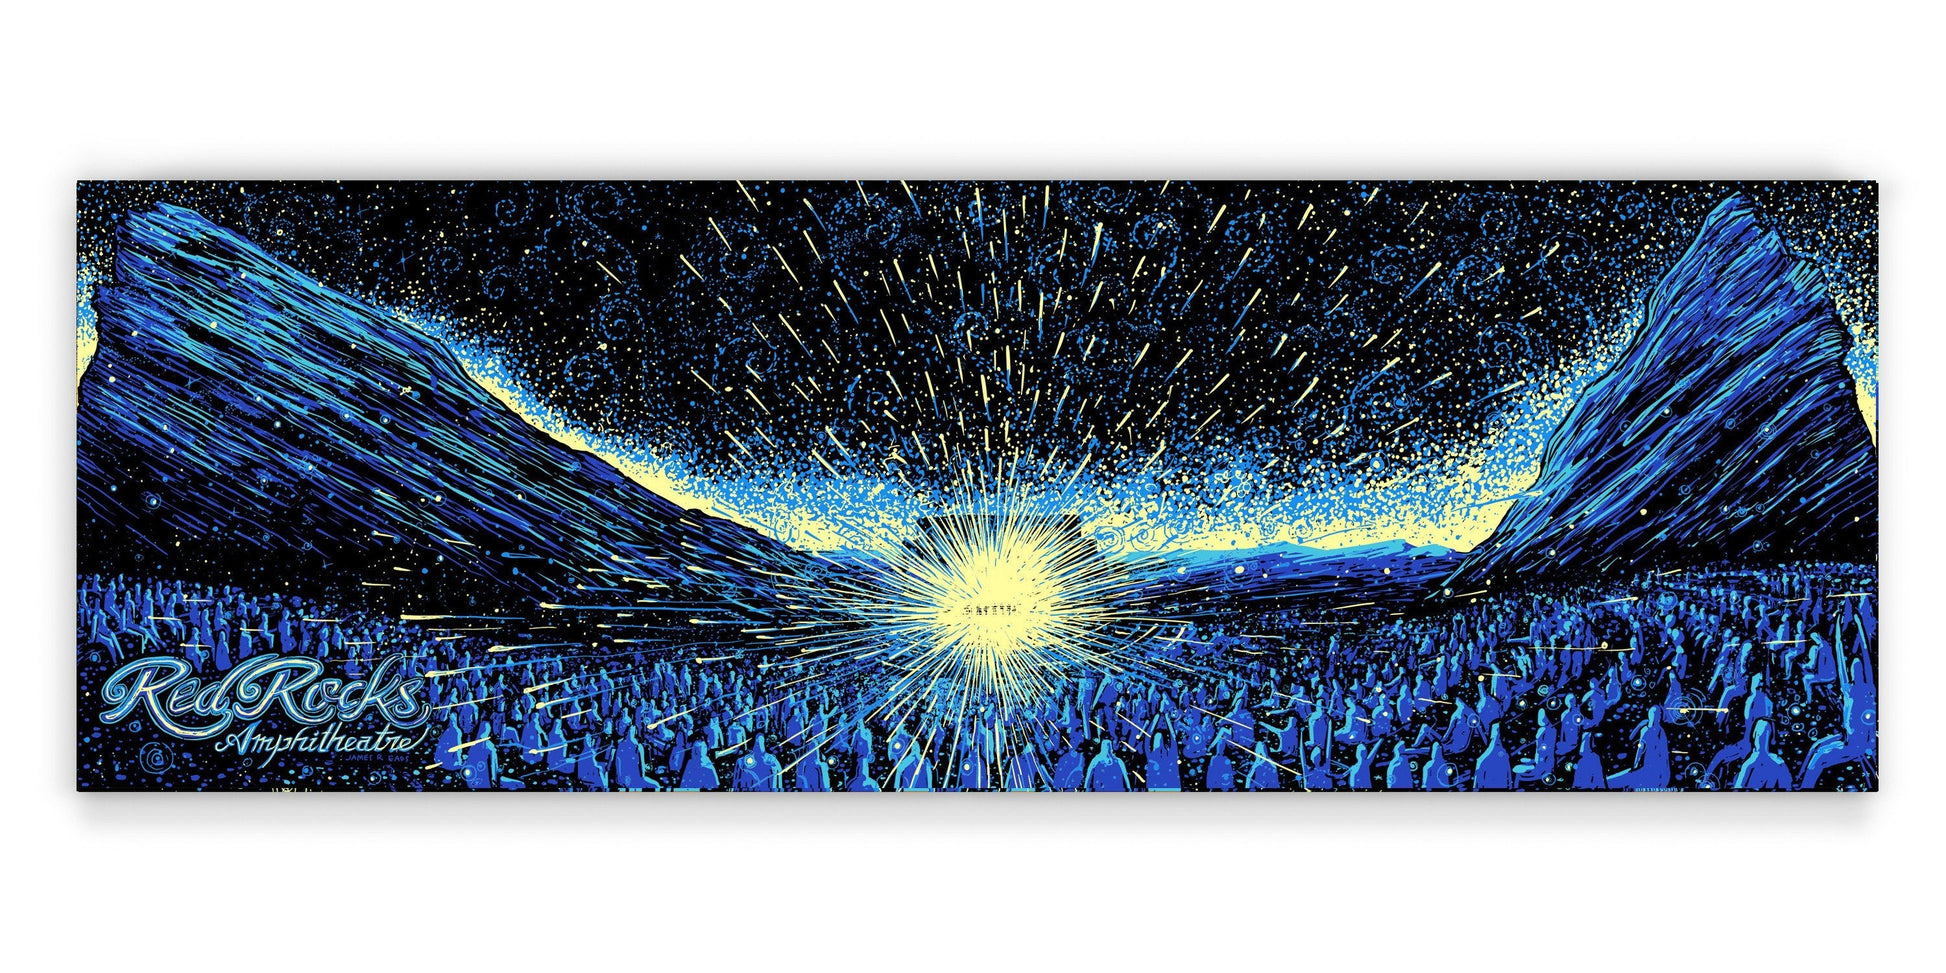 Red Rocks Glow in the Dark (Edition of 125) James R. Eads